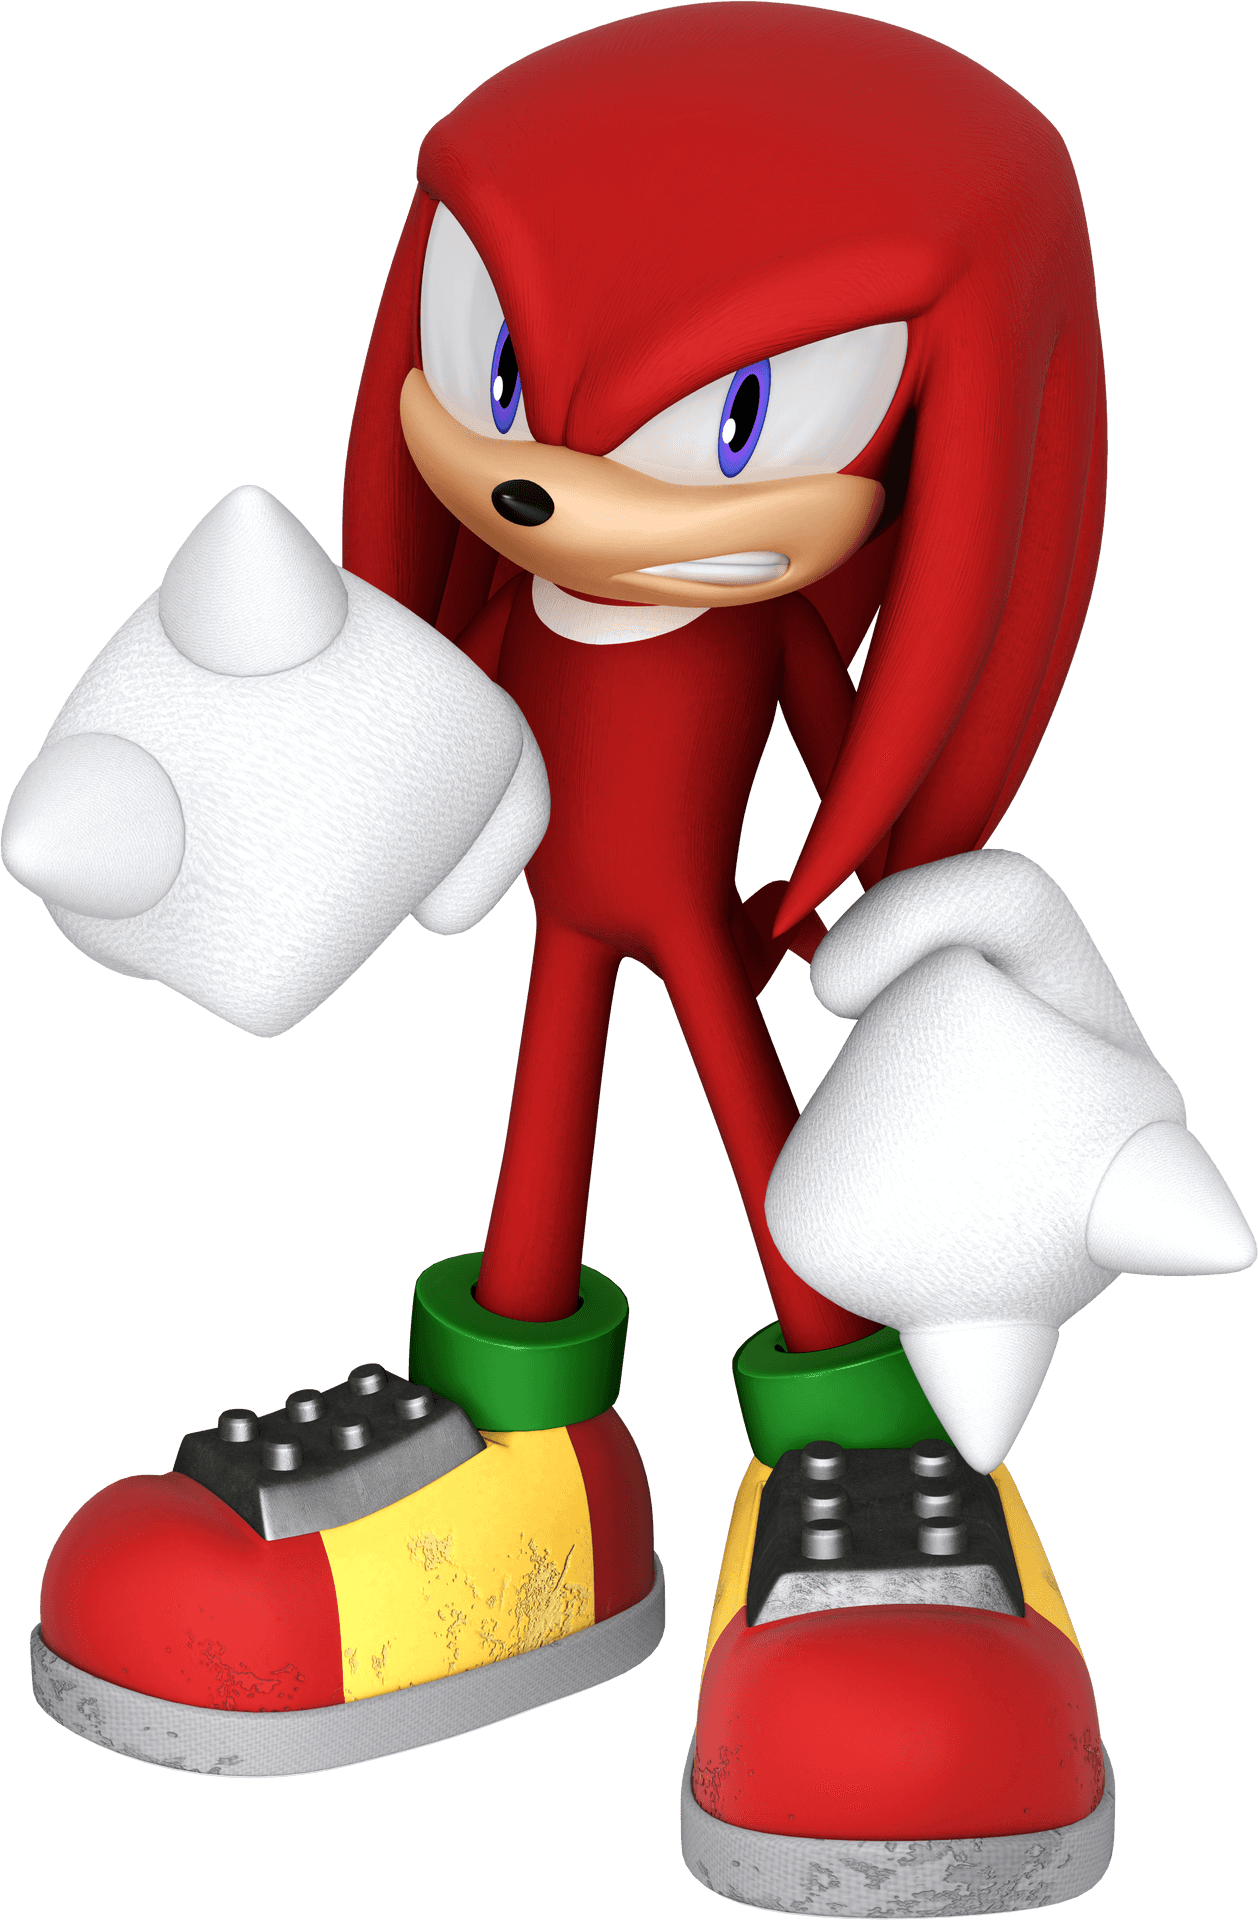 Download Knuckles The Echidna Character Pose | Wallpapers.com